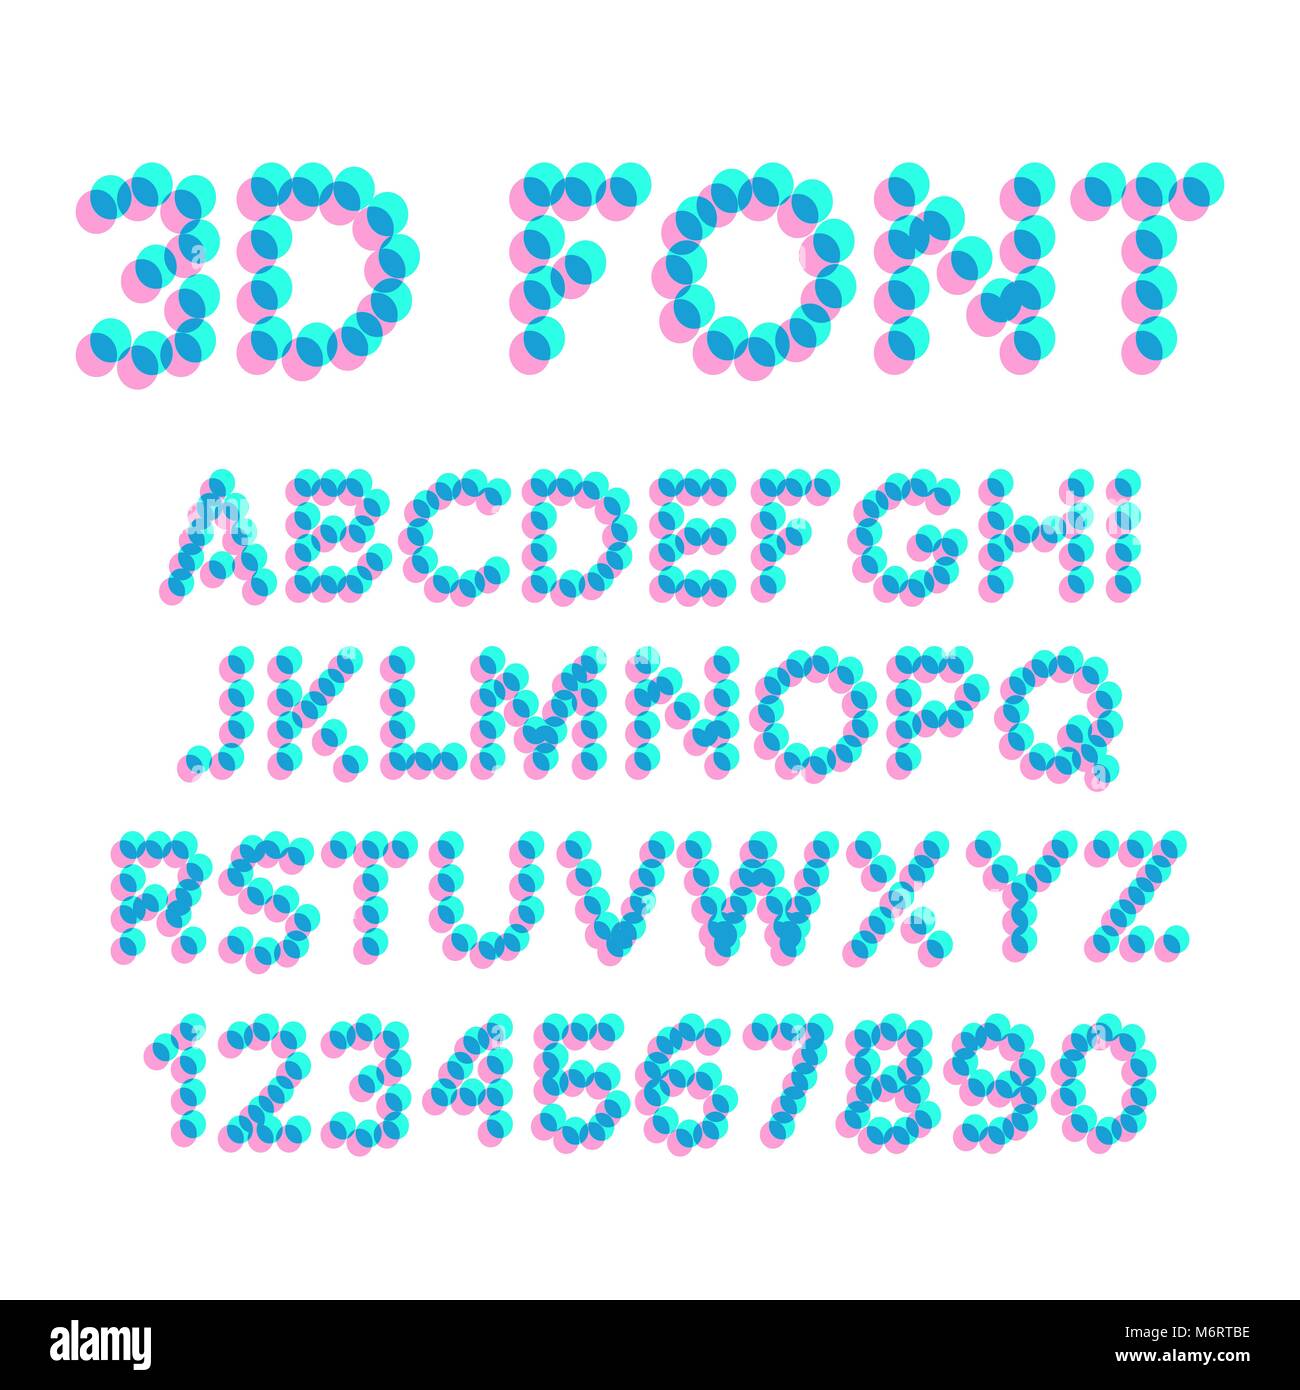 3D Effect Pixel Stereo Font Vector. Distortion Numerals And Letters. Illustration Stock Vector